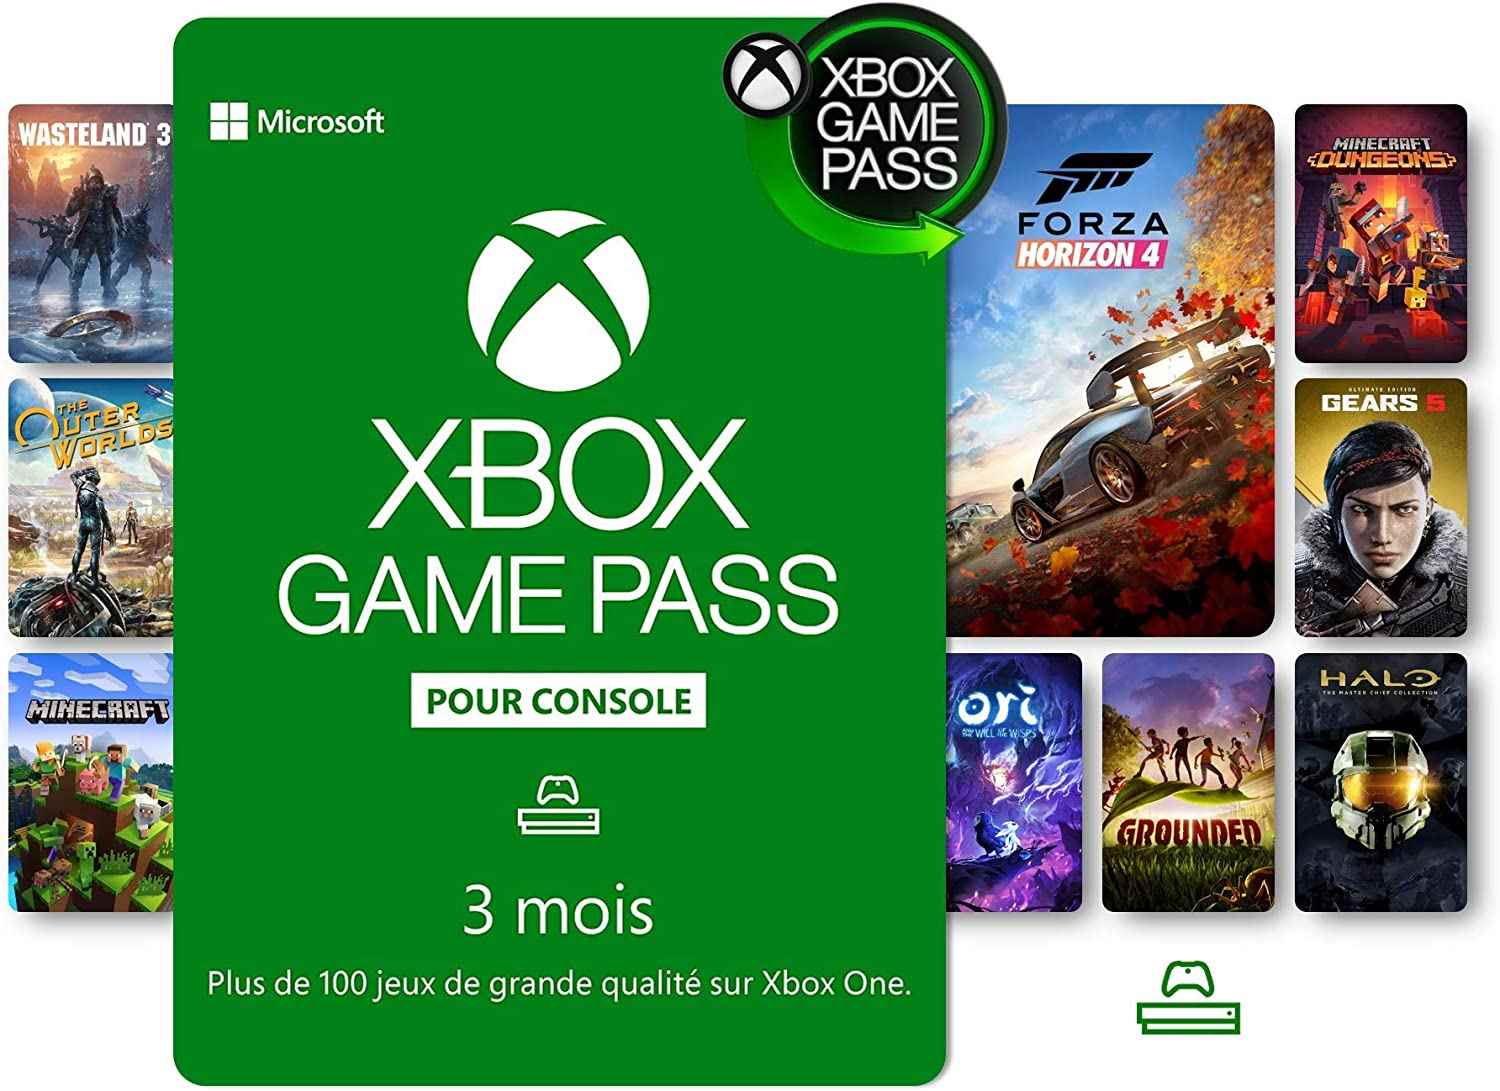 Xbox Game Pass subscription - 3 months